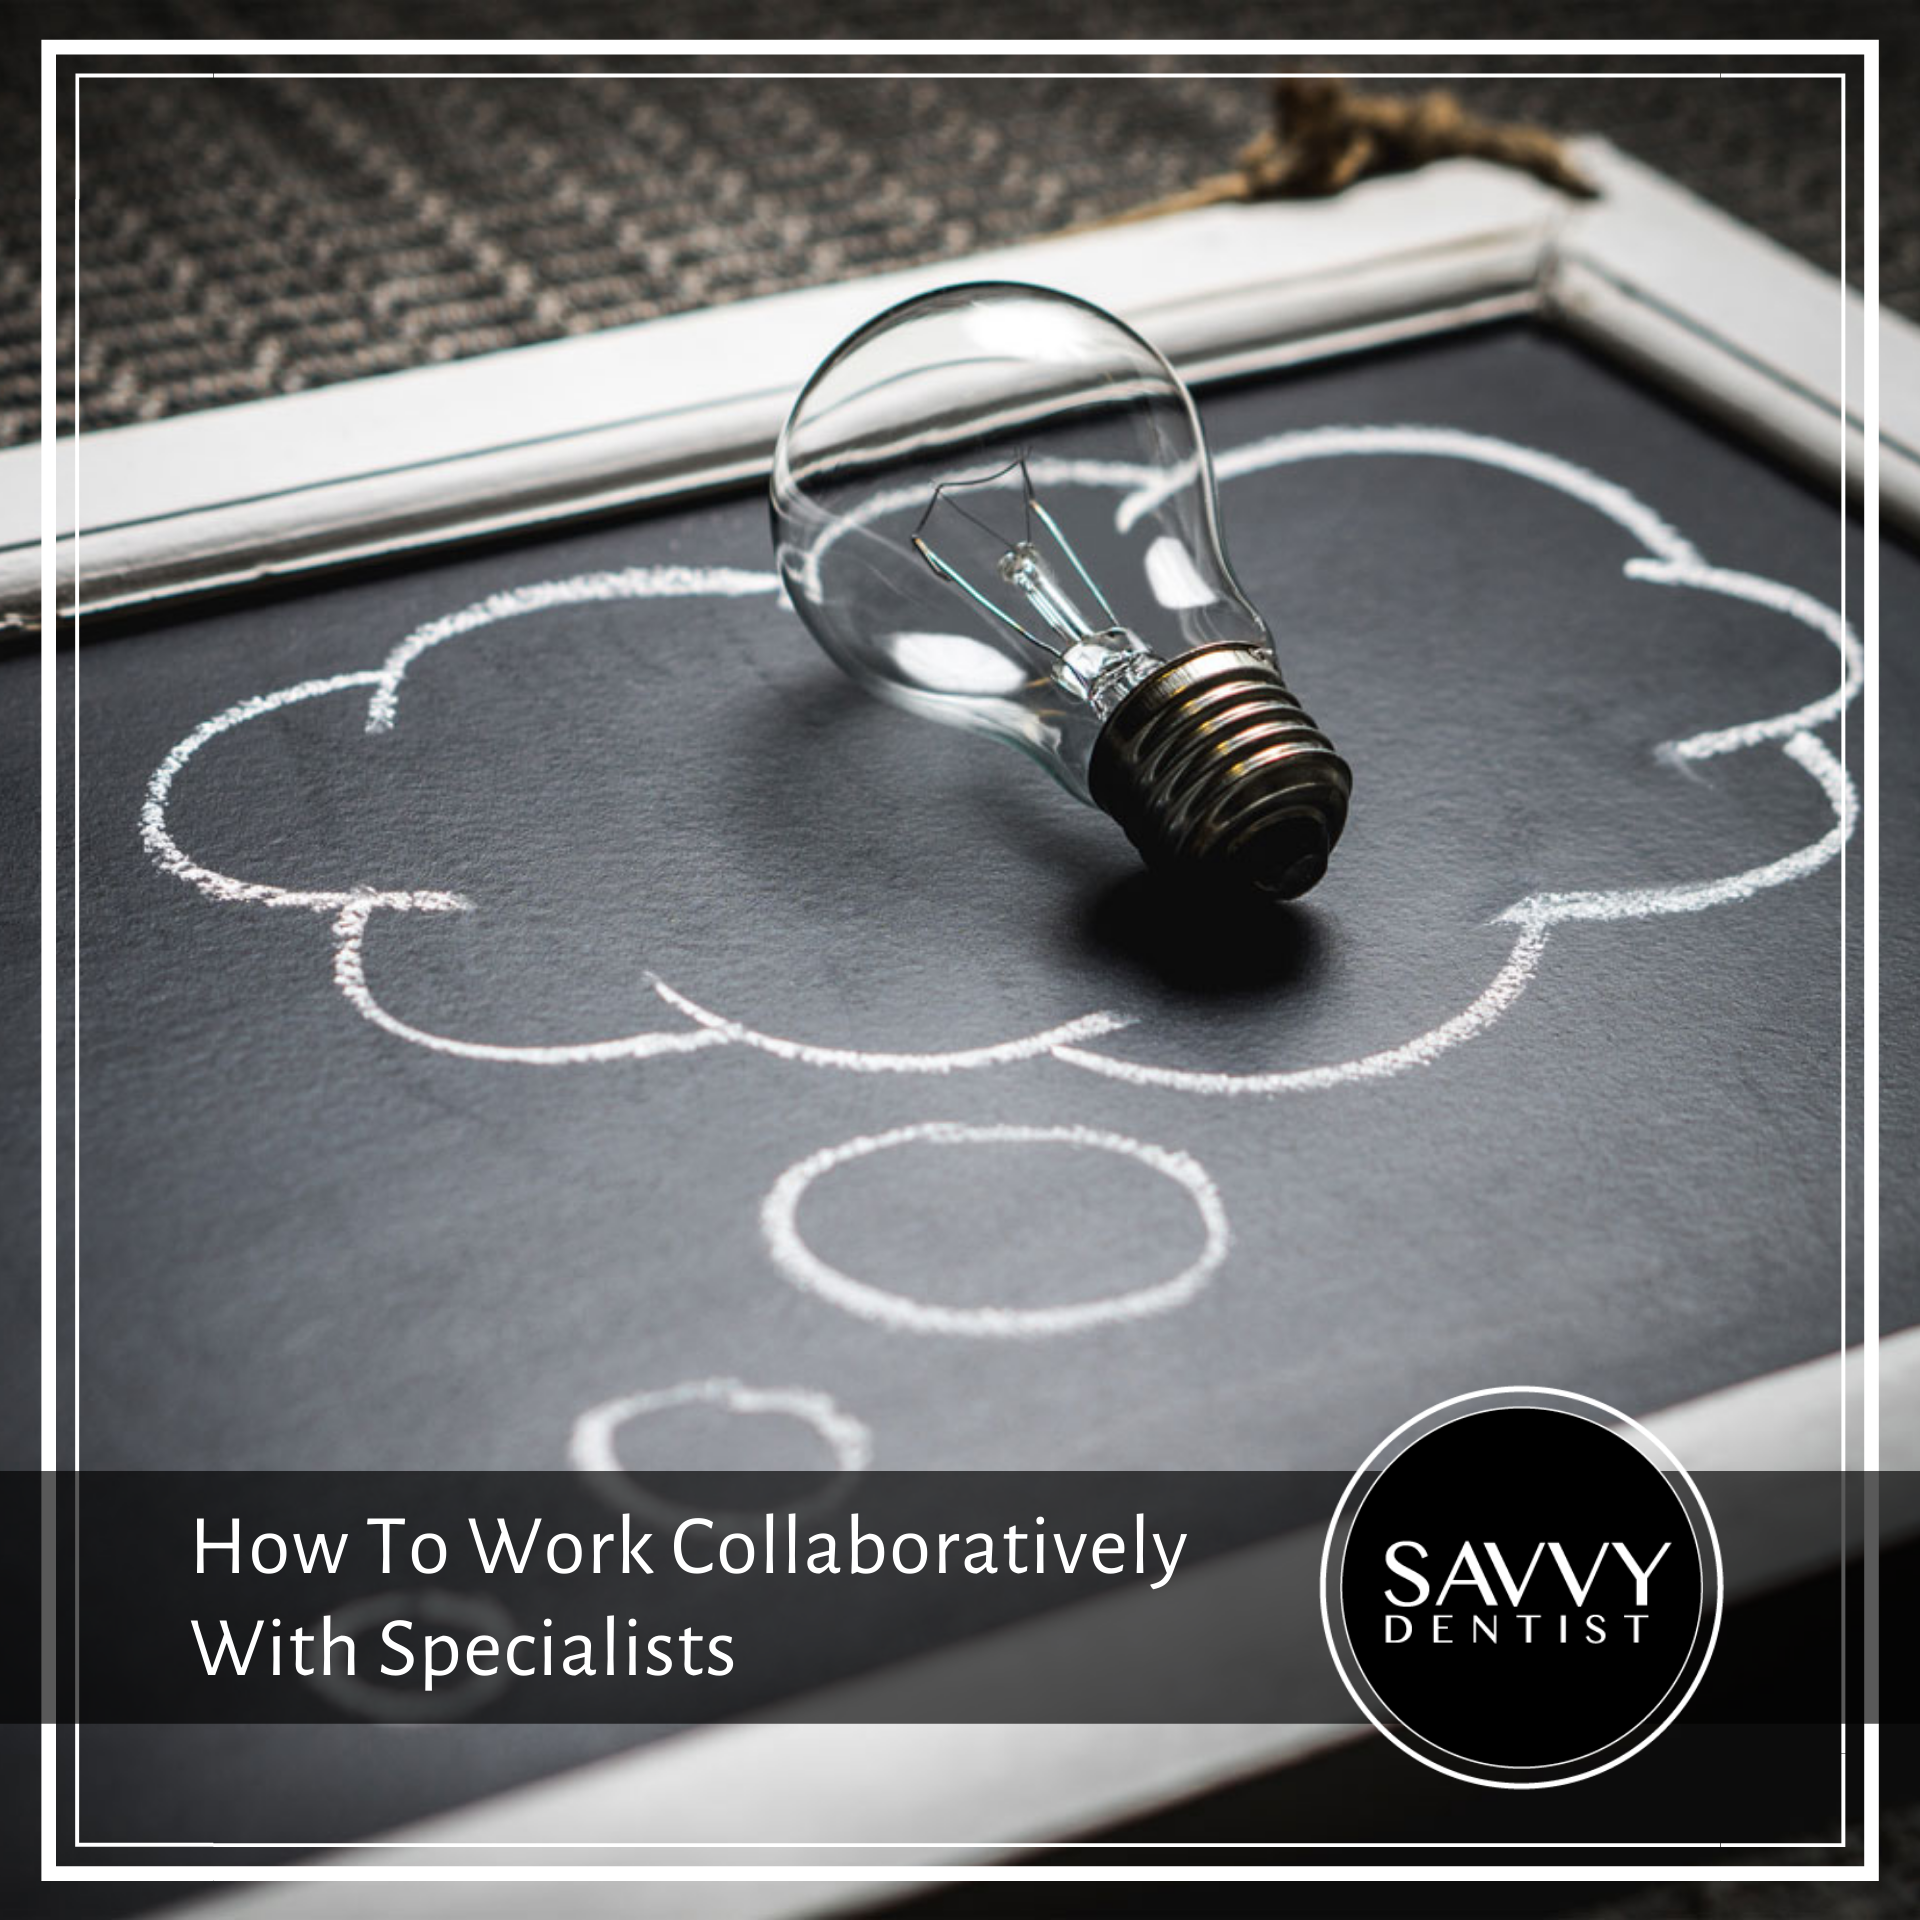 How To Work Collaboratively With Specialists